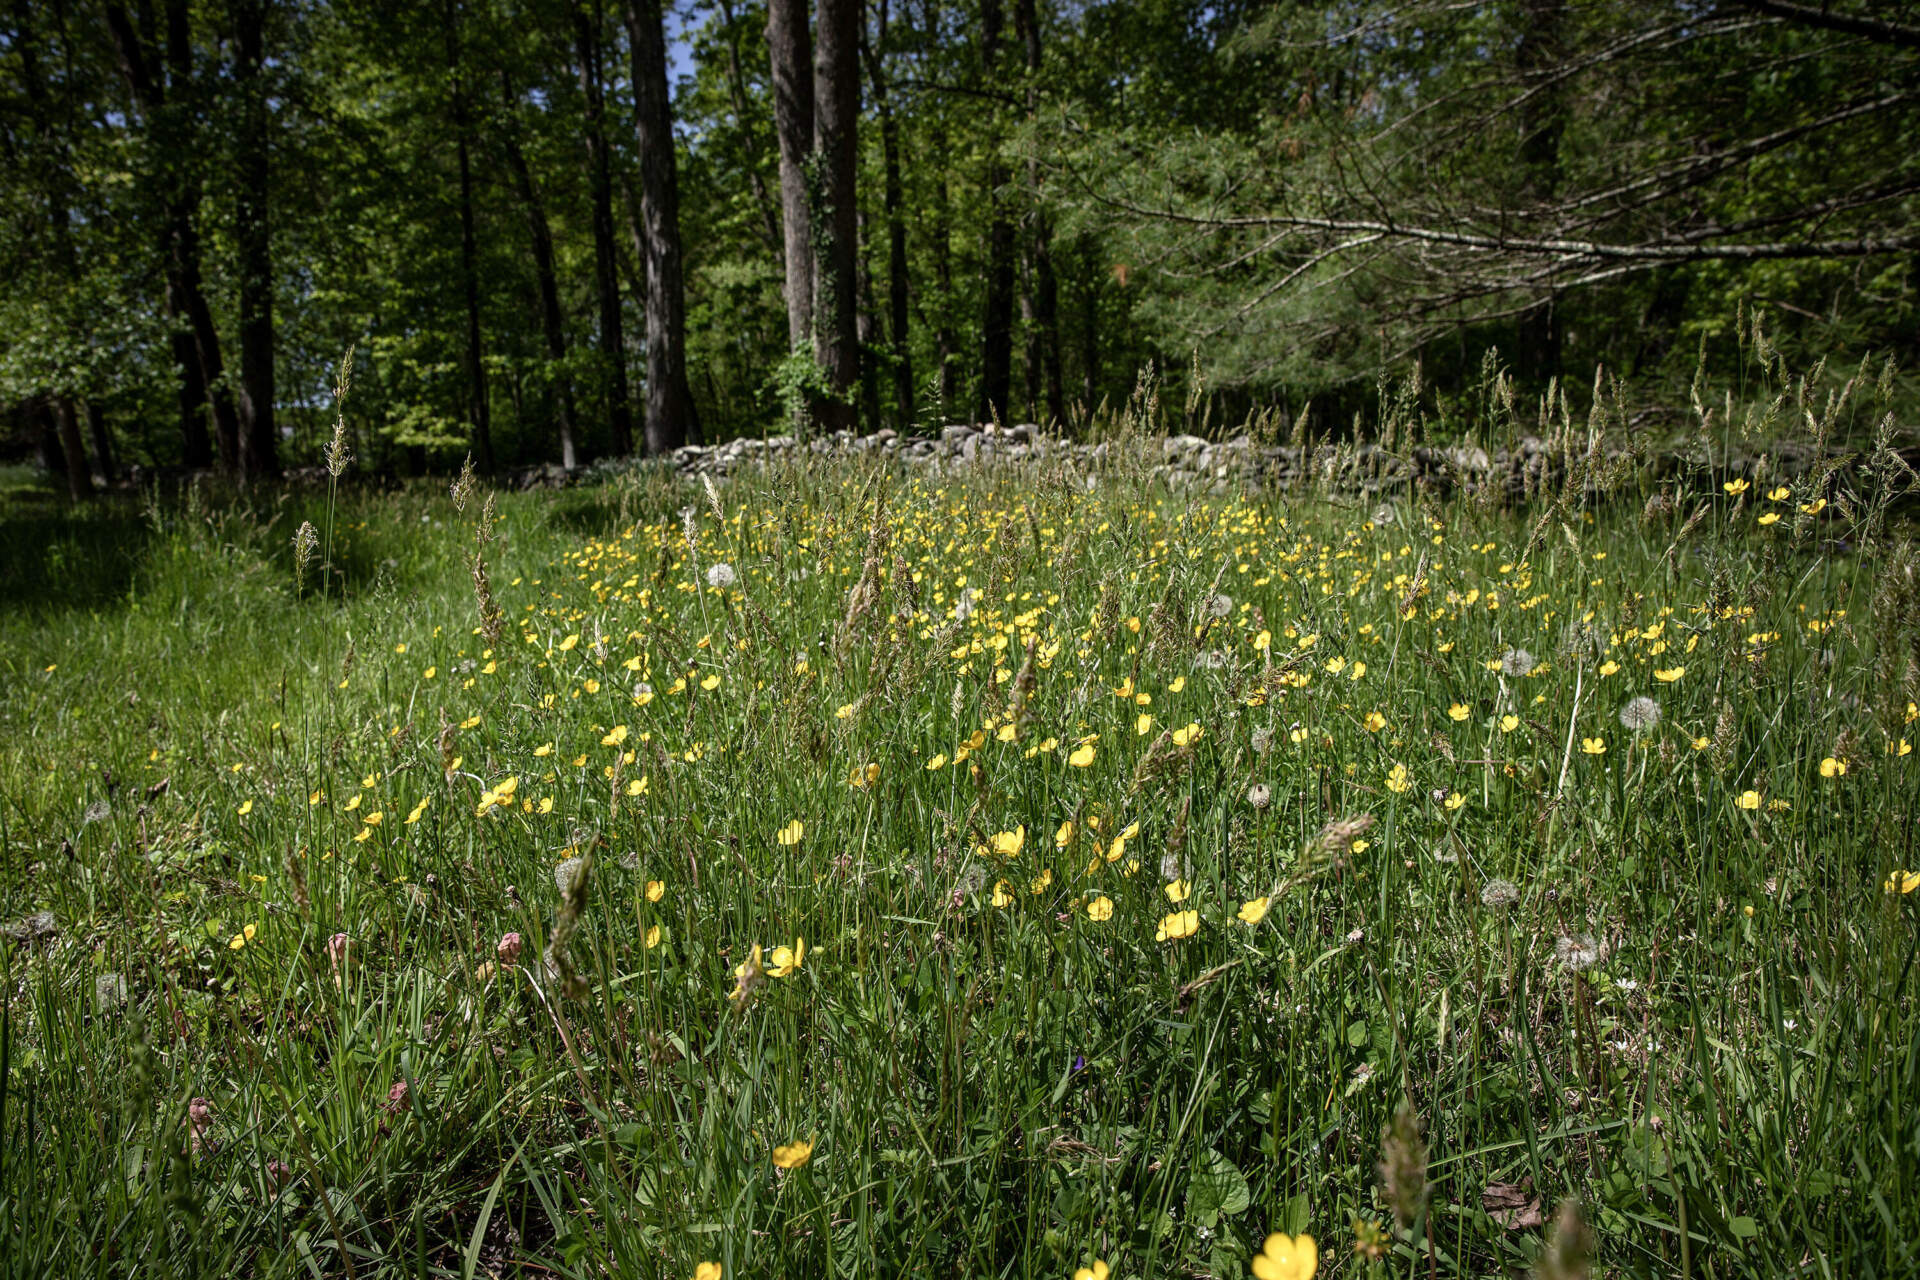 Bulbous buttercups in a meadow, surrounded by a stone wall and woodland, in a area near Mary Hollinshead's home which she aims to protect with conservation restrictions. (Robin Lubbock/WBUR)